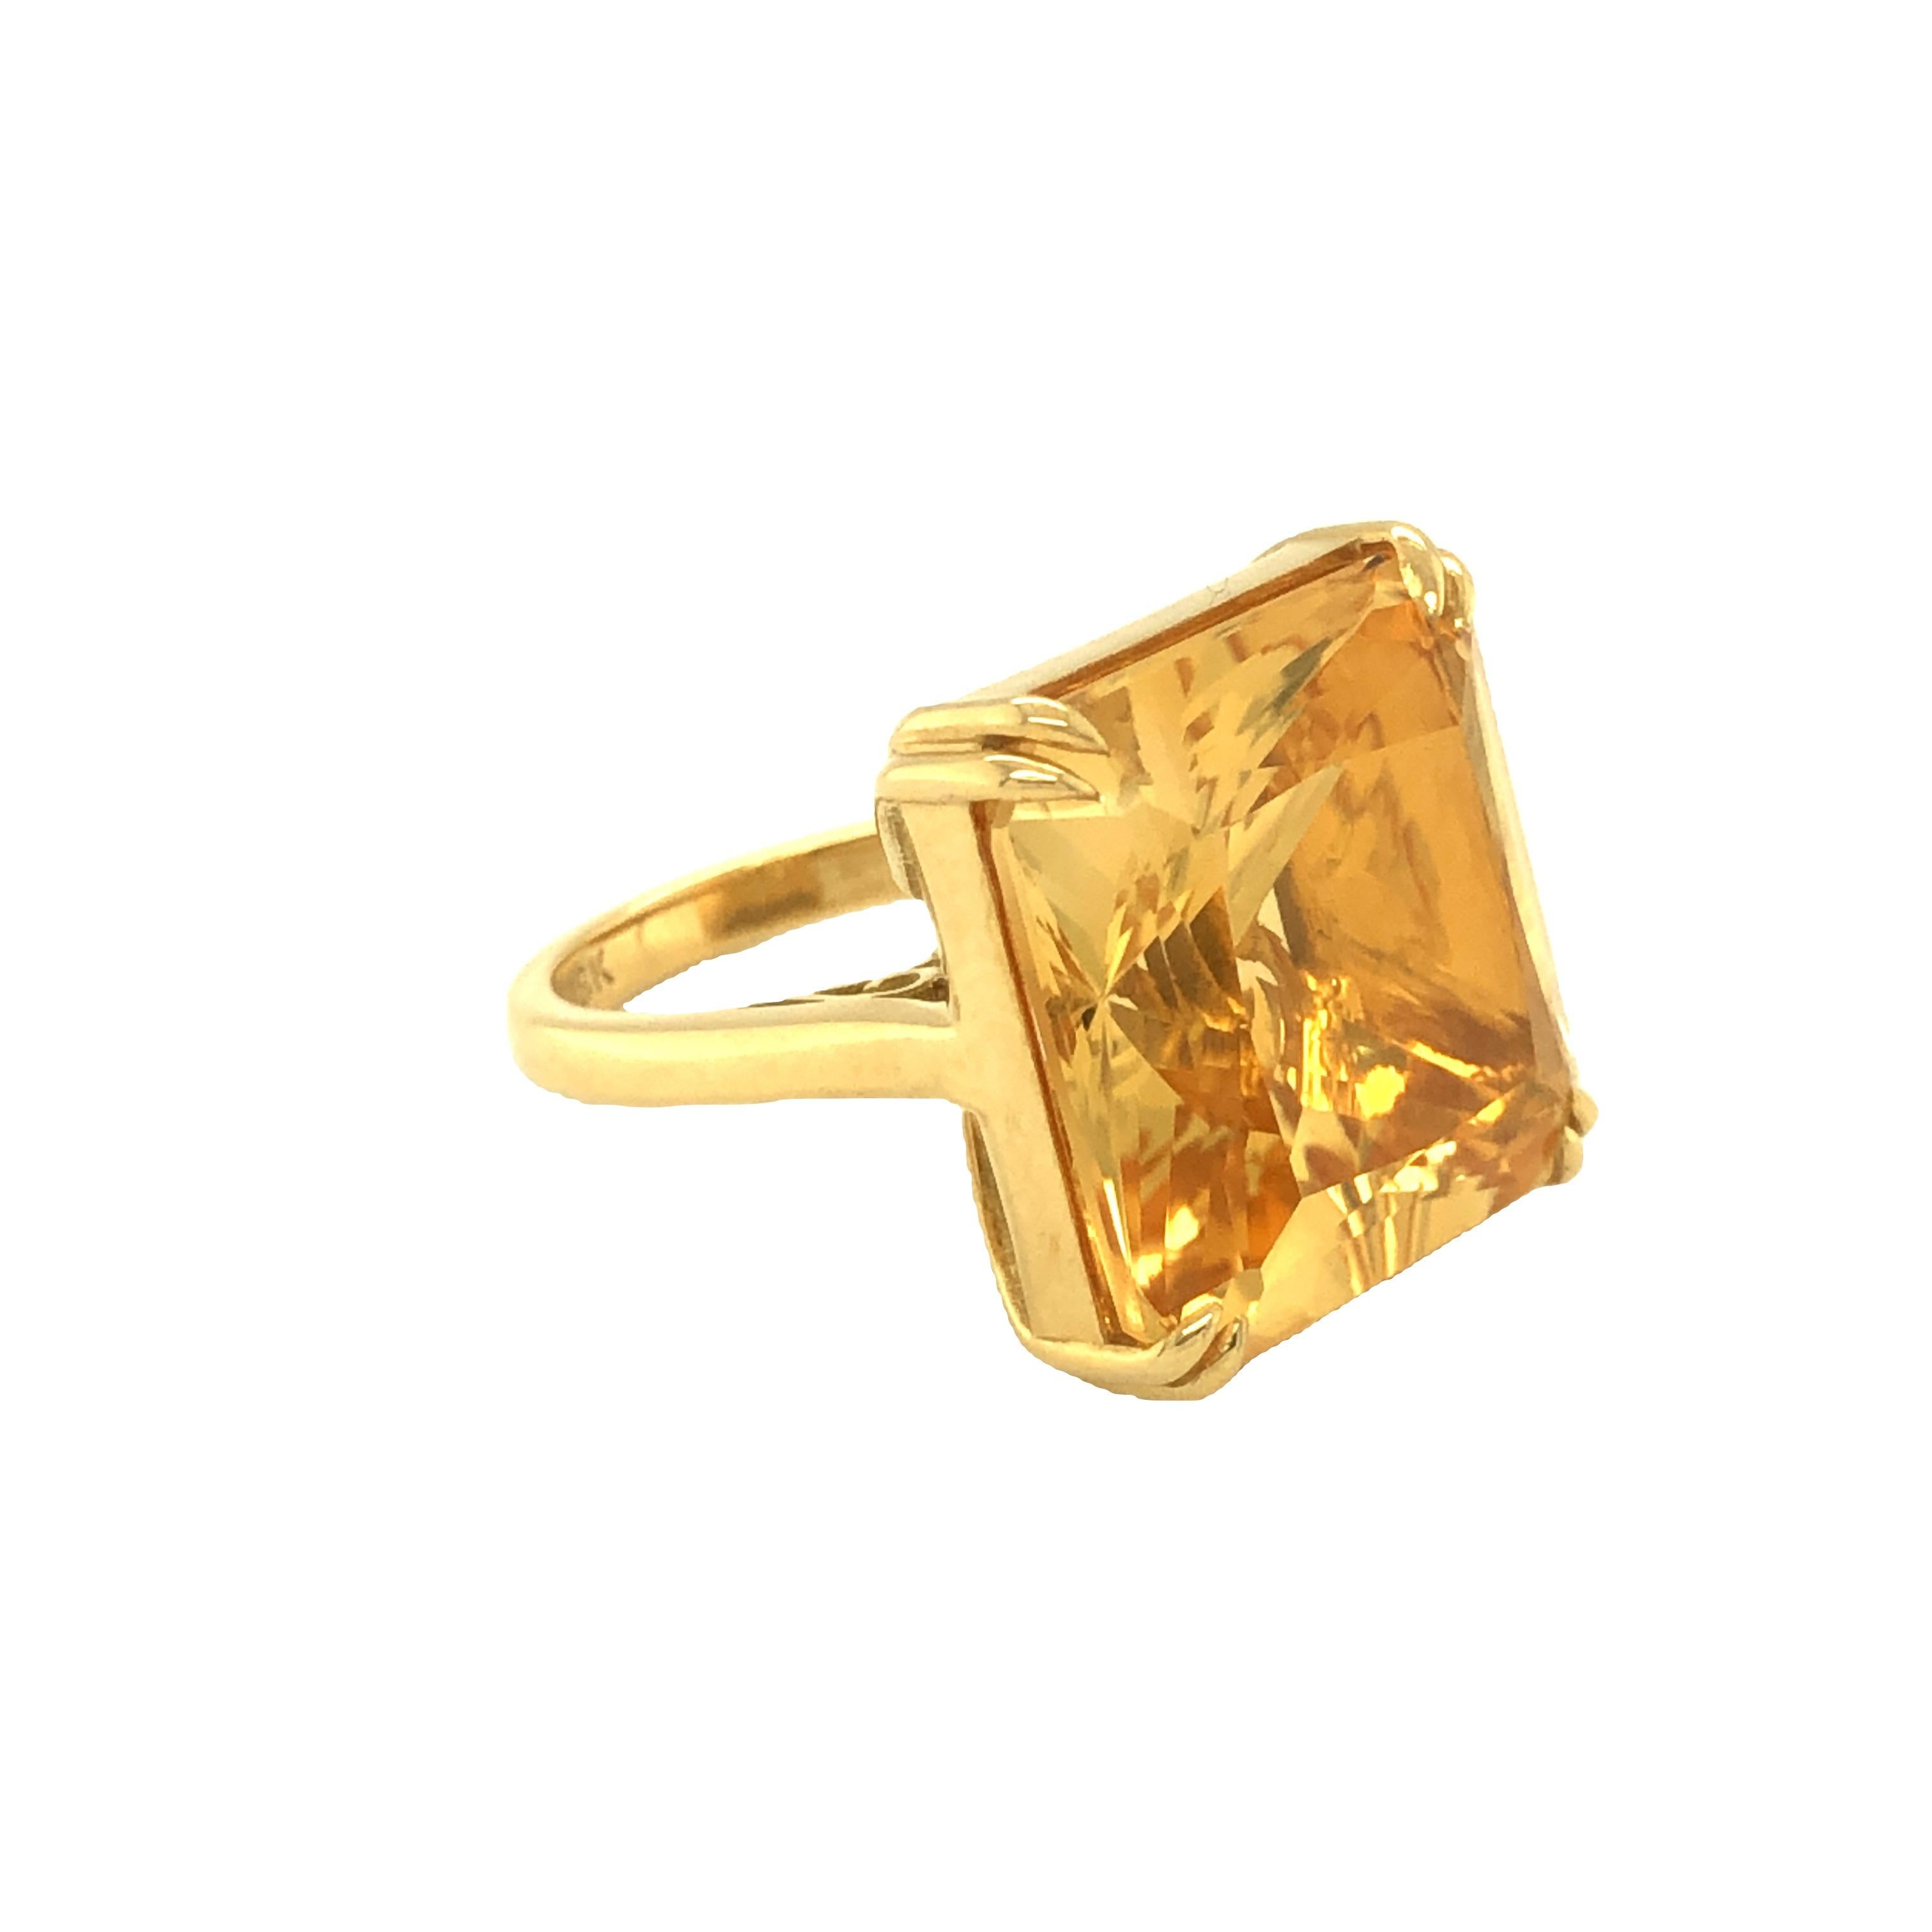 Gems Are Forever 13 carat Citrine Solitaire Cocktail Ring 18K Yellow Gold In New Condition For Sale In beverly hills, CA